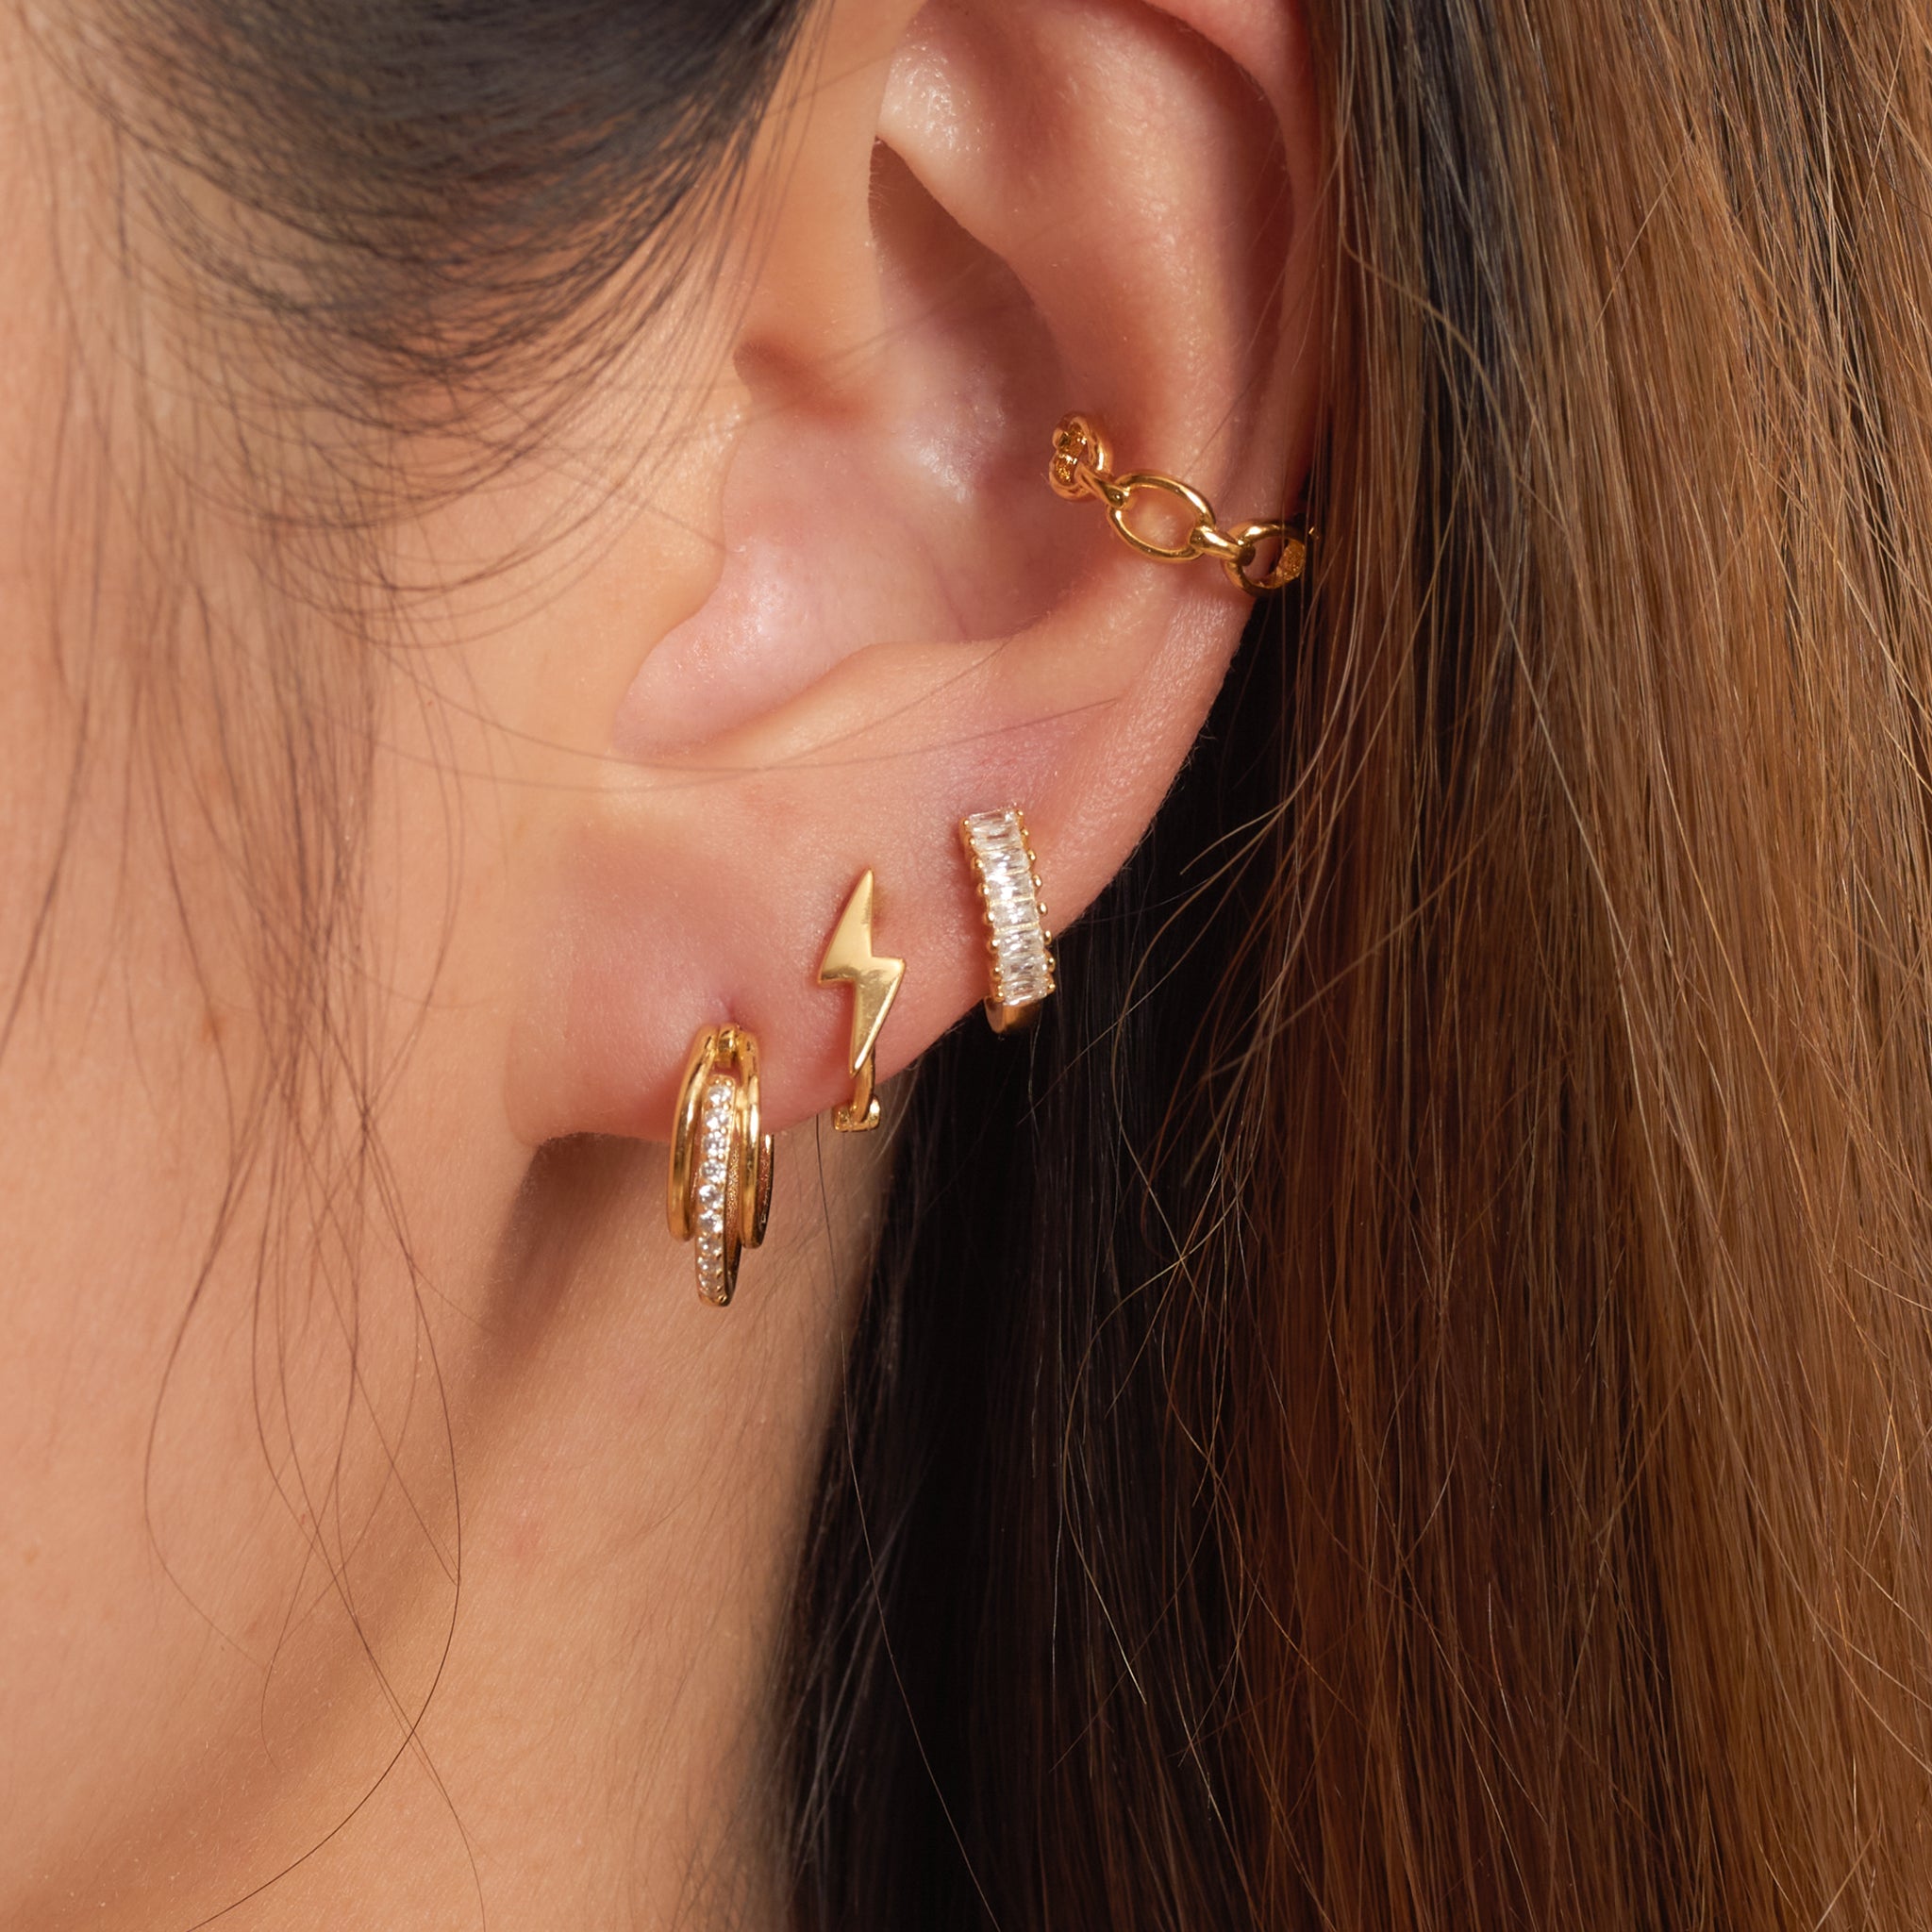 Everyday fine/semi-fine earrings in NYC that not irritate your